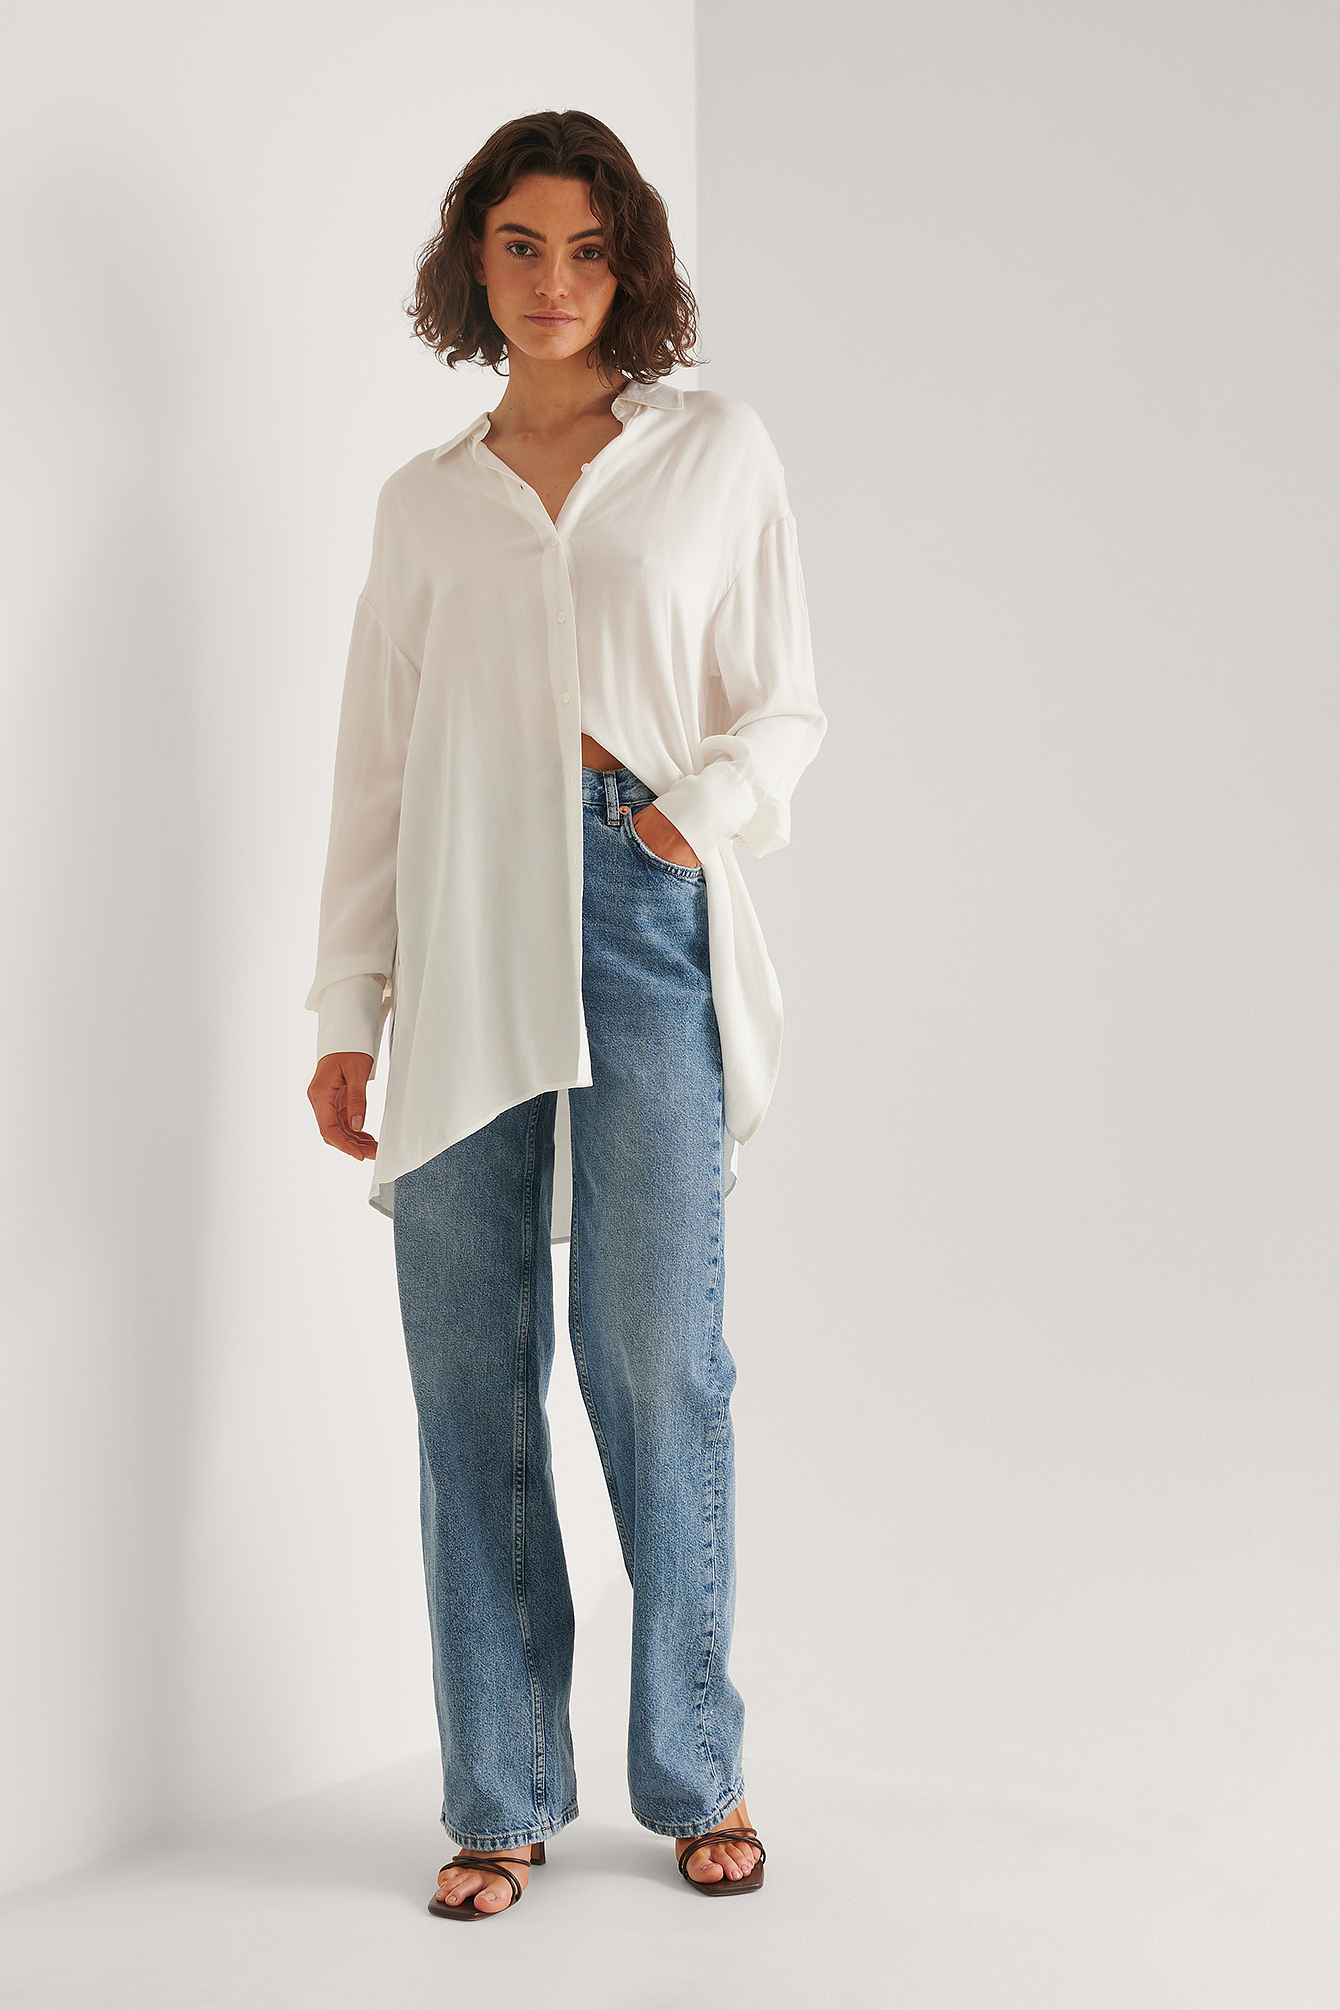 Long Slit Soft Shirt Outfit.